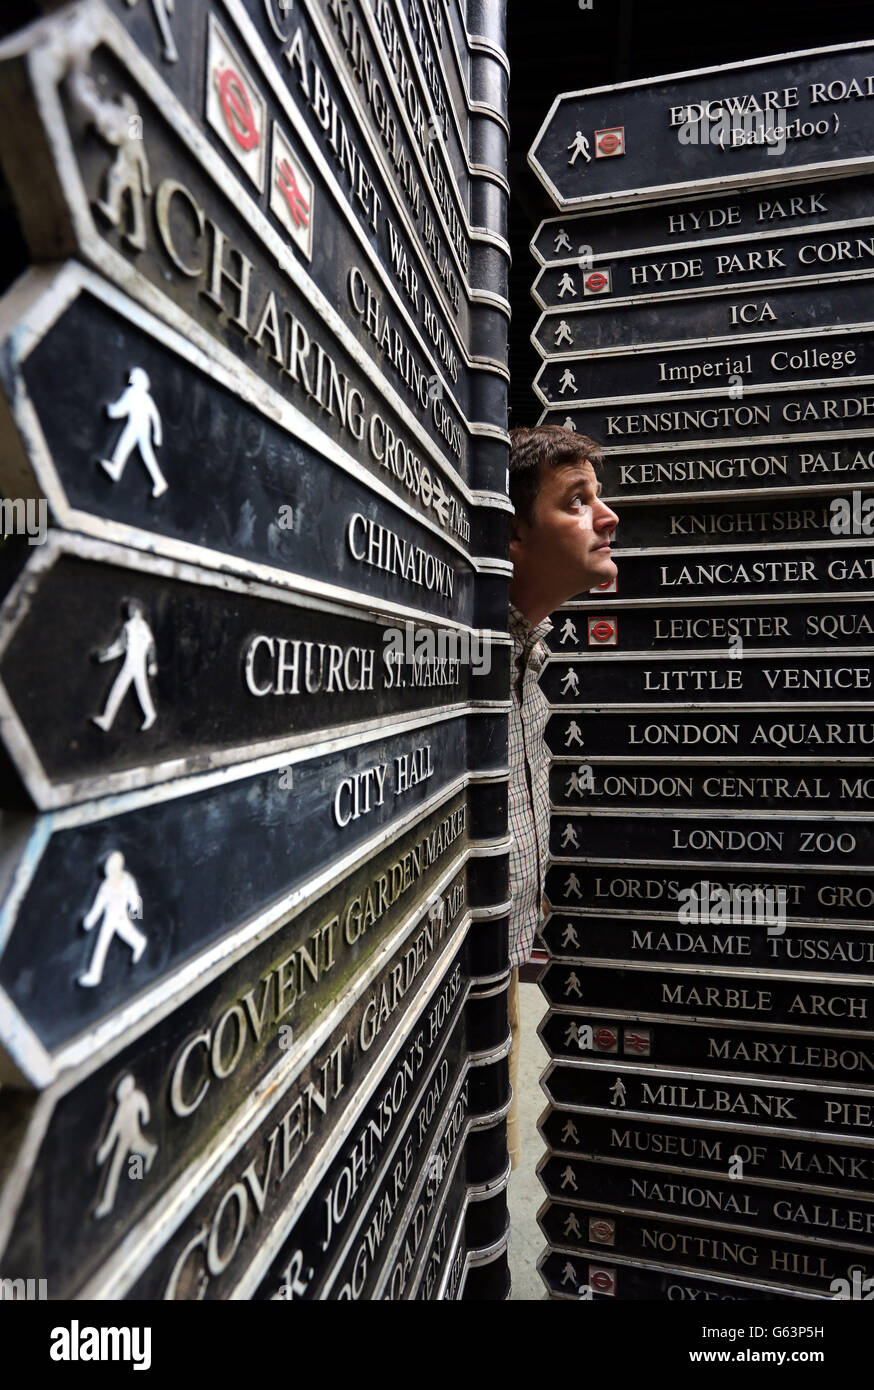 Rupert van der Werff of Summers Place Auctions in Billingshurst, West Sussex prepares over 300 historic London street signs for auction later this month. Picture date: Tuesday May 14, 2013. Photo credit should read: Gareth Fuller/PA Wire Stock Photo